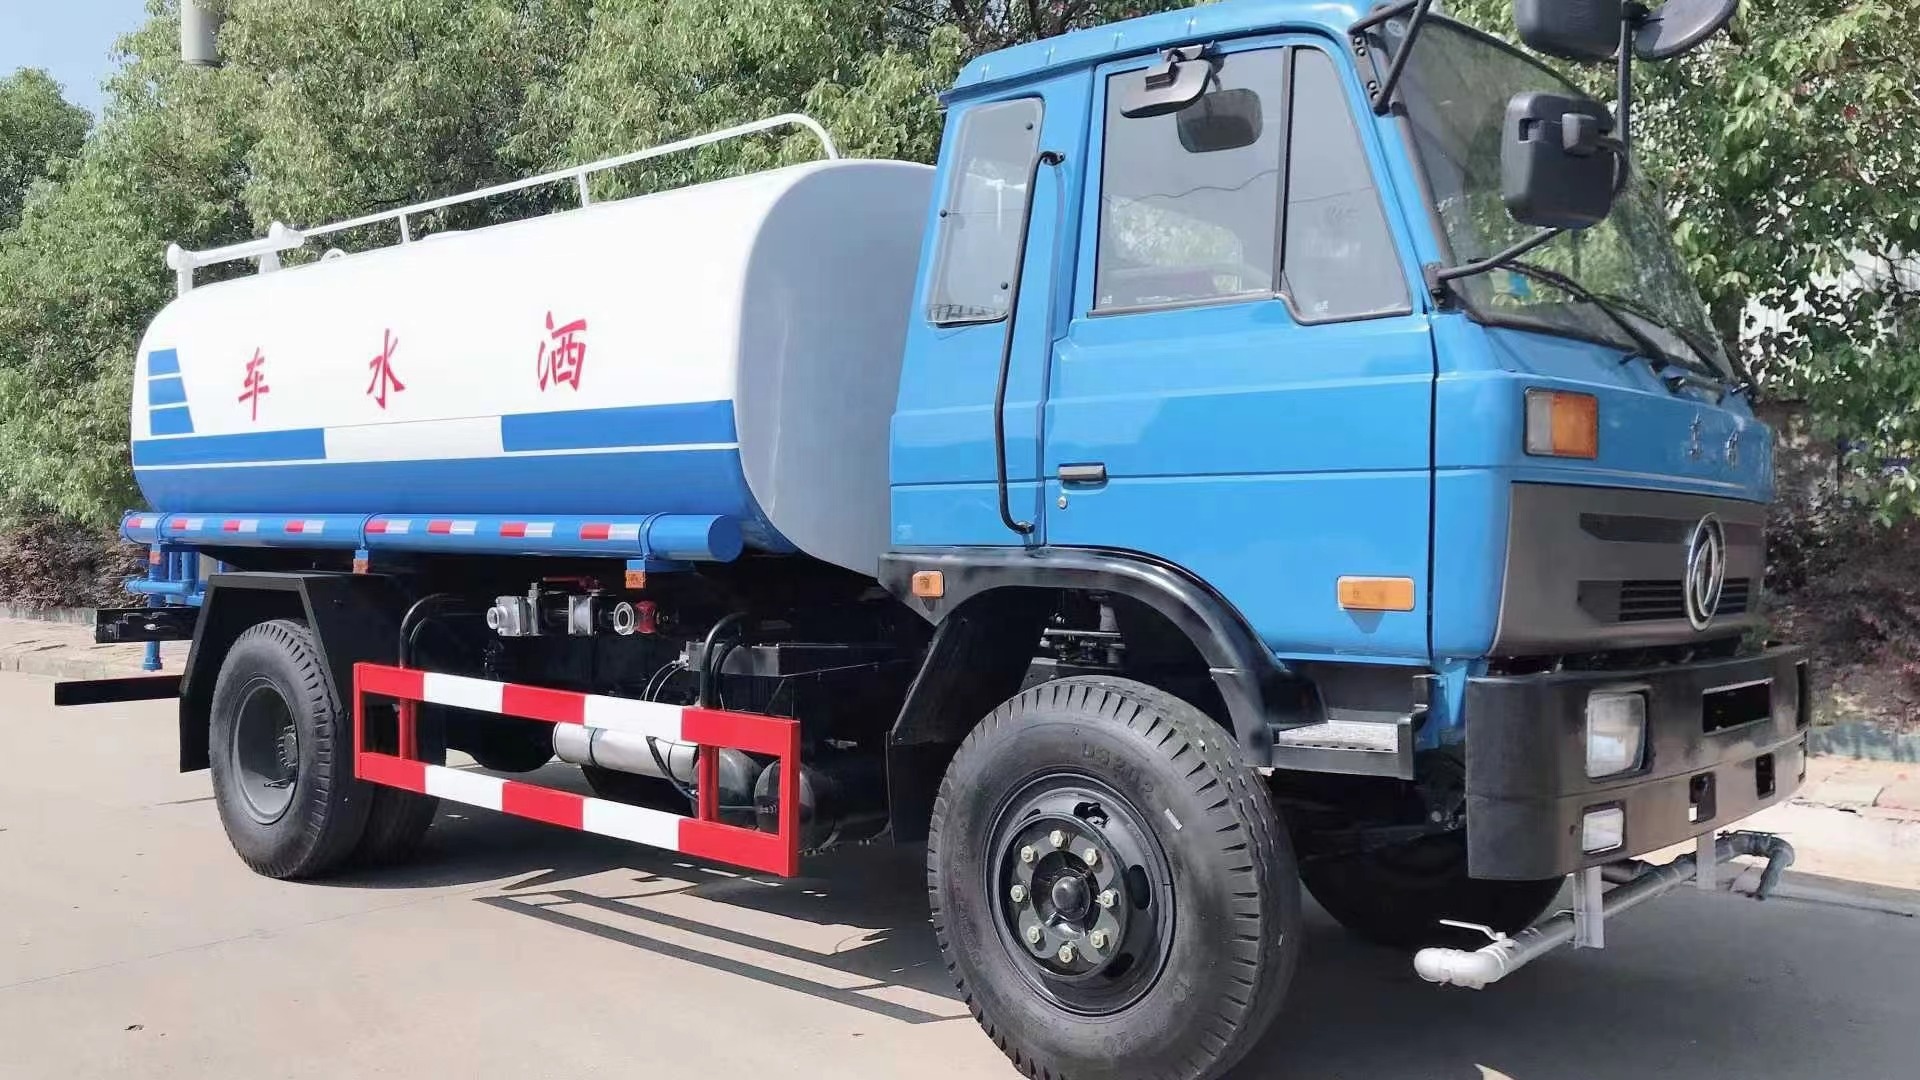 Water Truck EURO 3 Truck for Environment